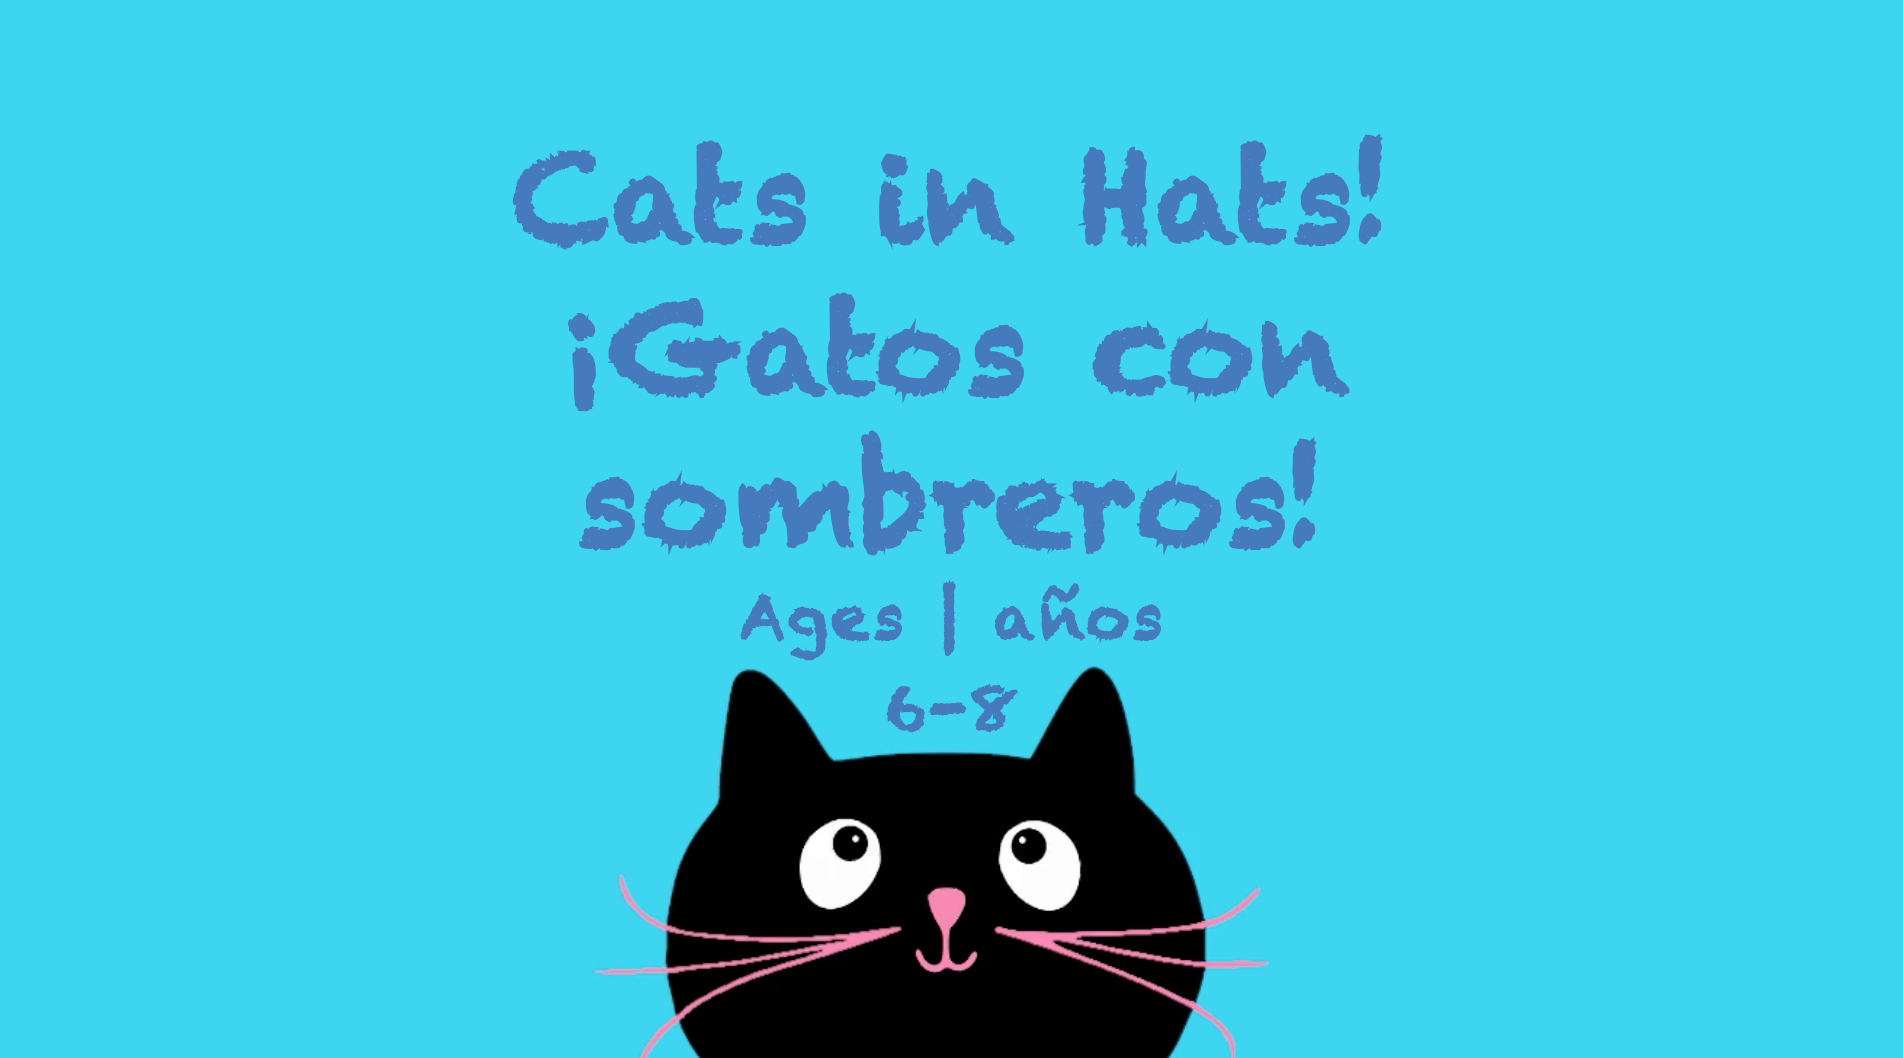 Cats in Hats! for 6-8 year olds